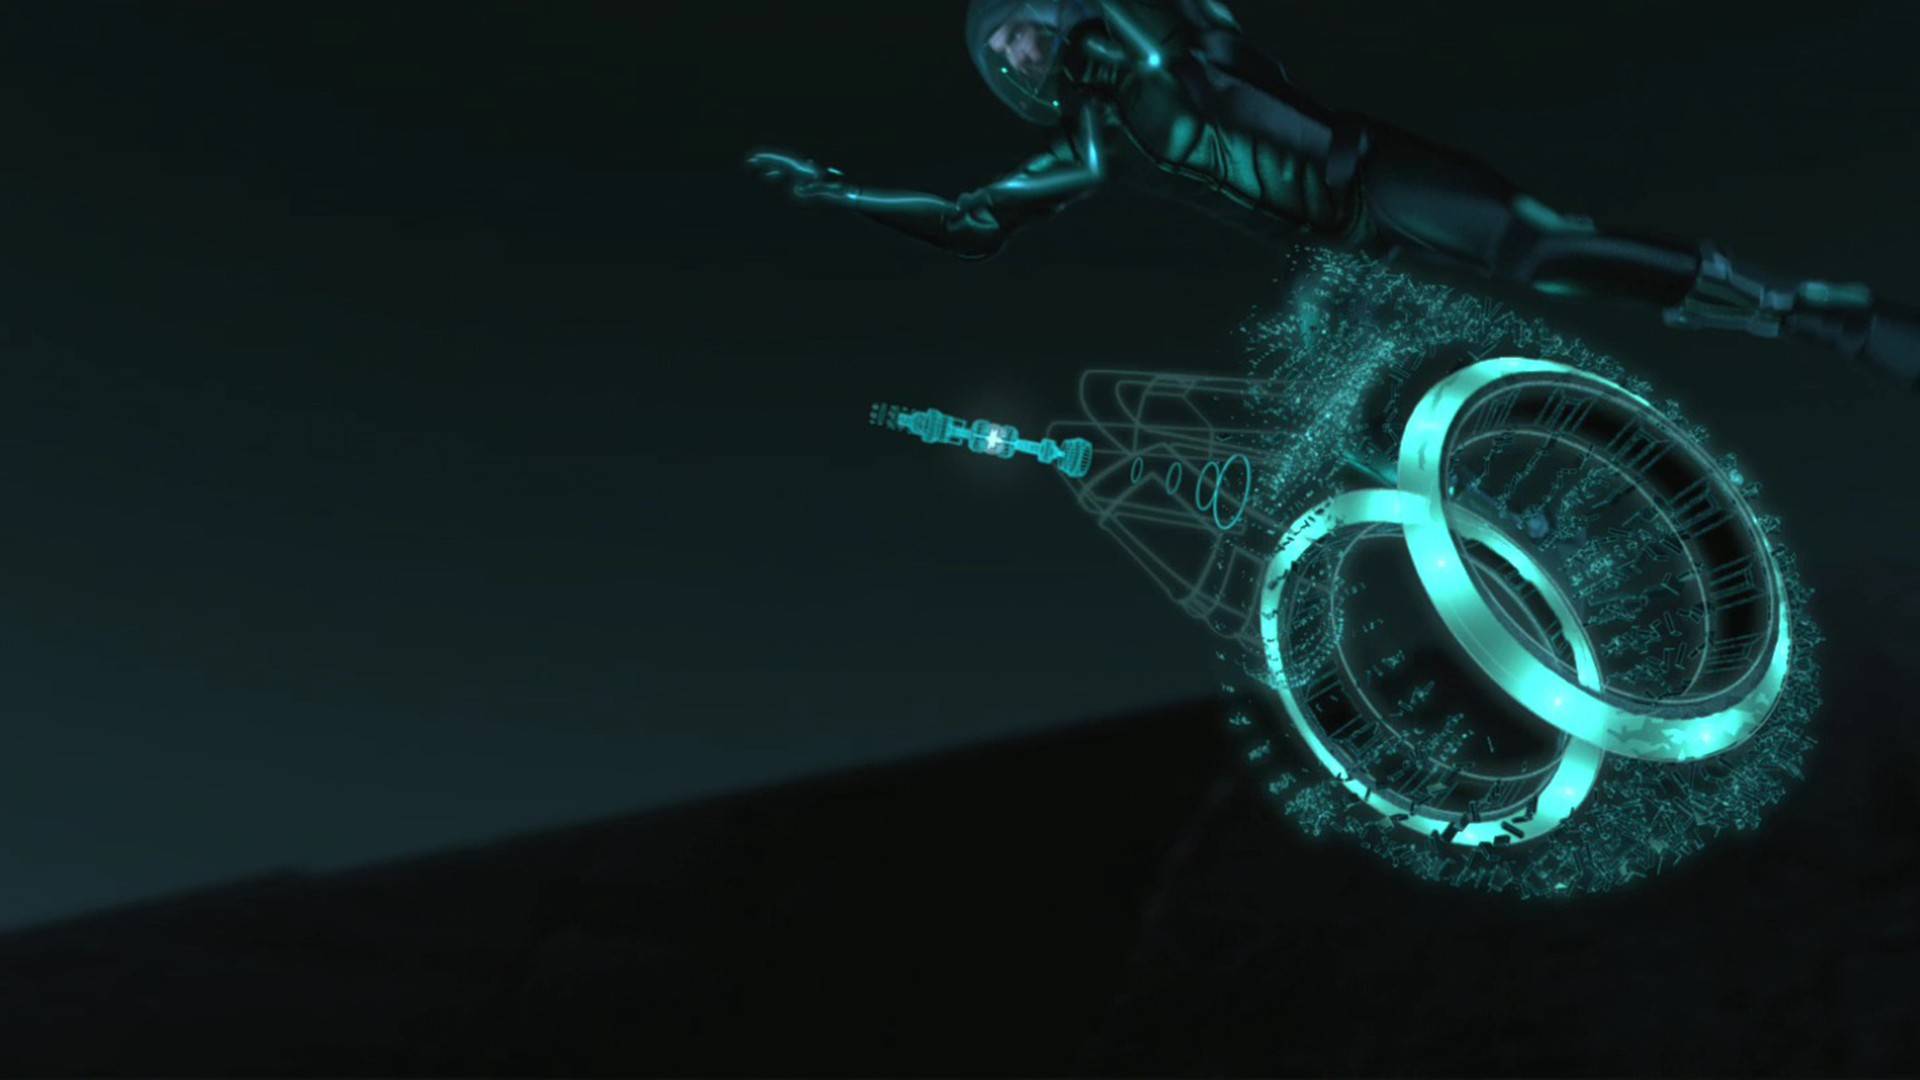 Tron Legacy jumping on the motorcycle - Wallpapers Wallpaper